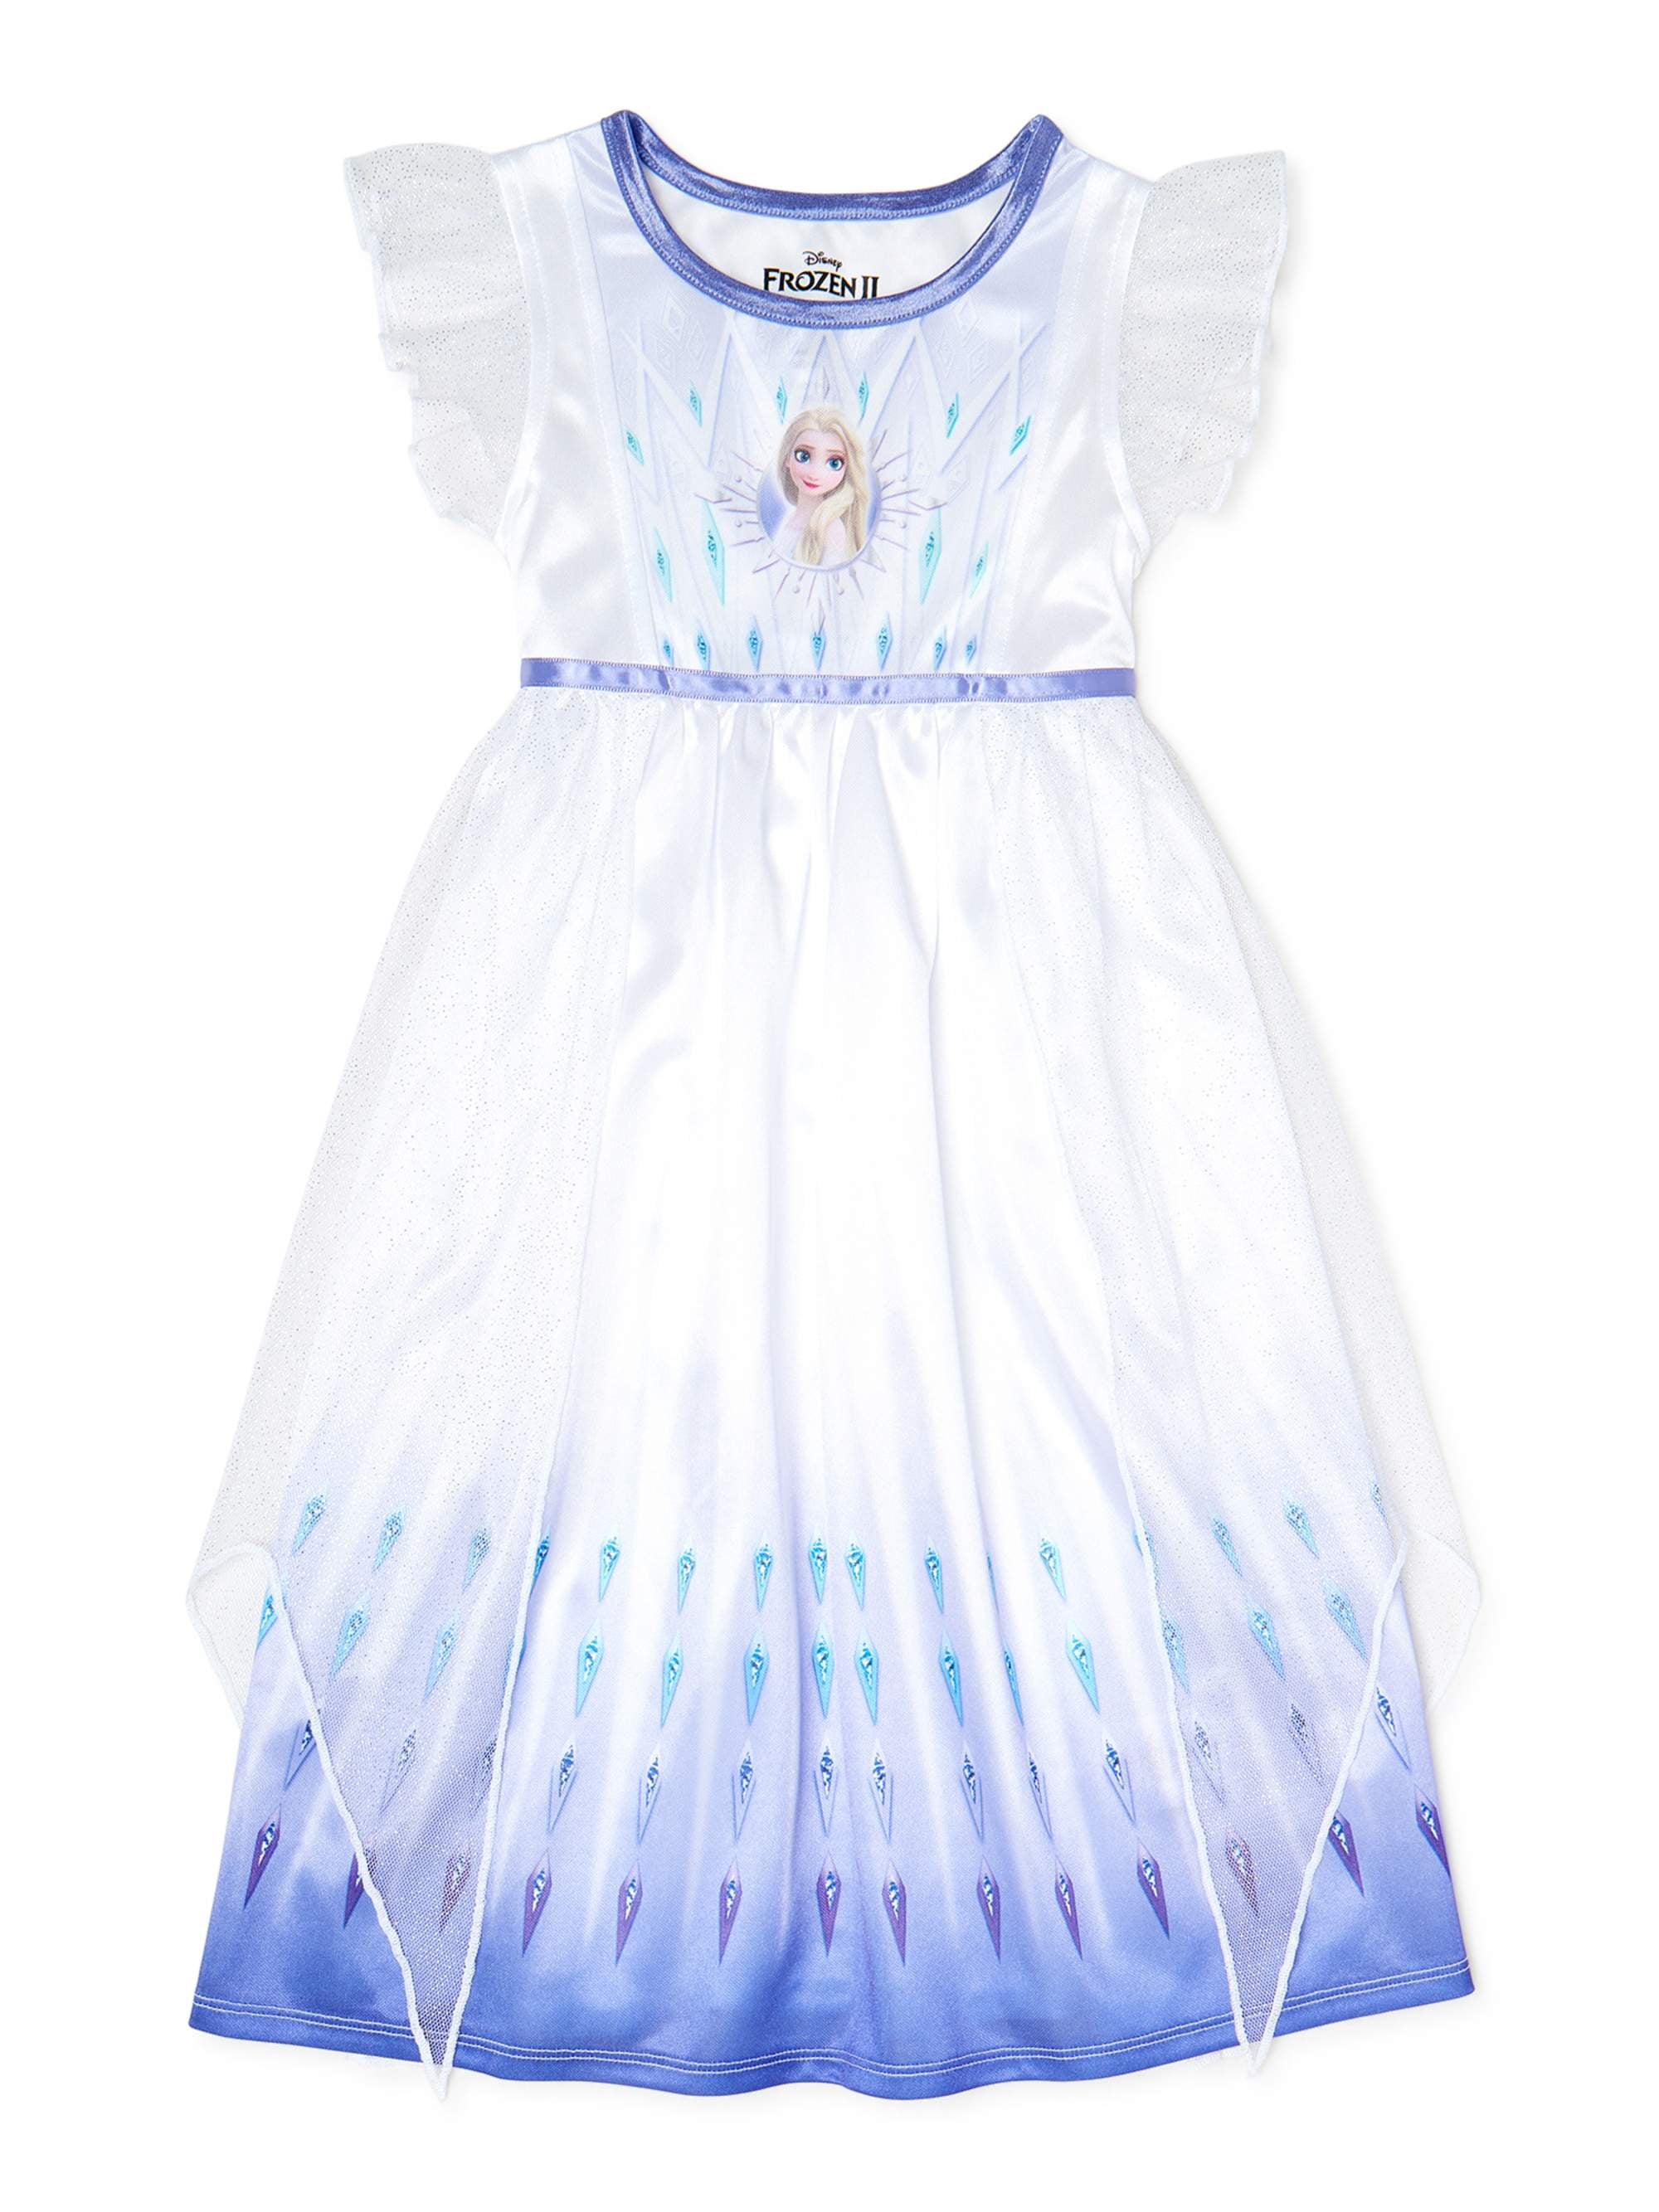 Freshbaffs Queen Snowflakes Maxi Dress Costume Party Fancy Dress with Accessories 7-8years